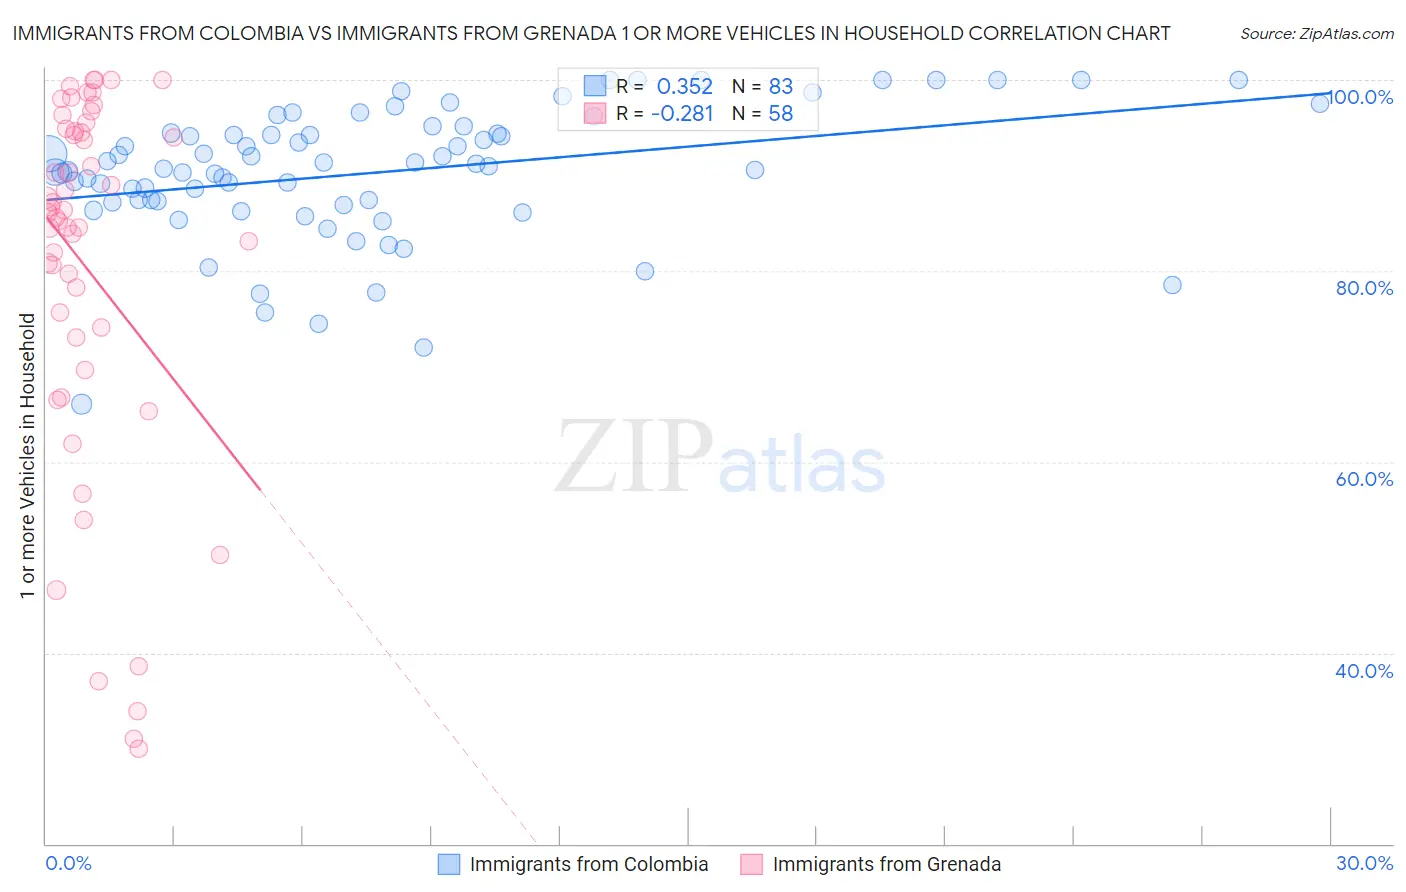 Immigrants from Colombia vs Immigrants from Grenada 1 or more Vehicles in Household